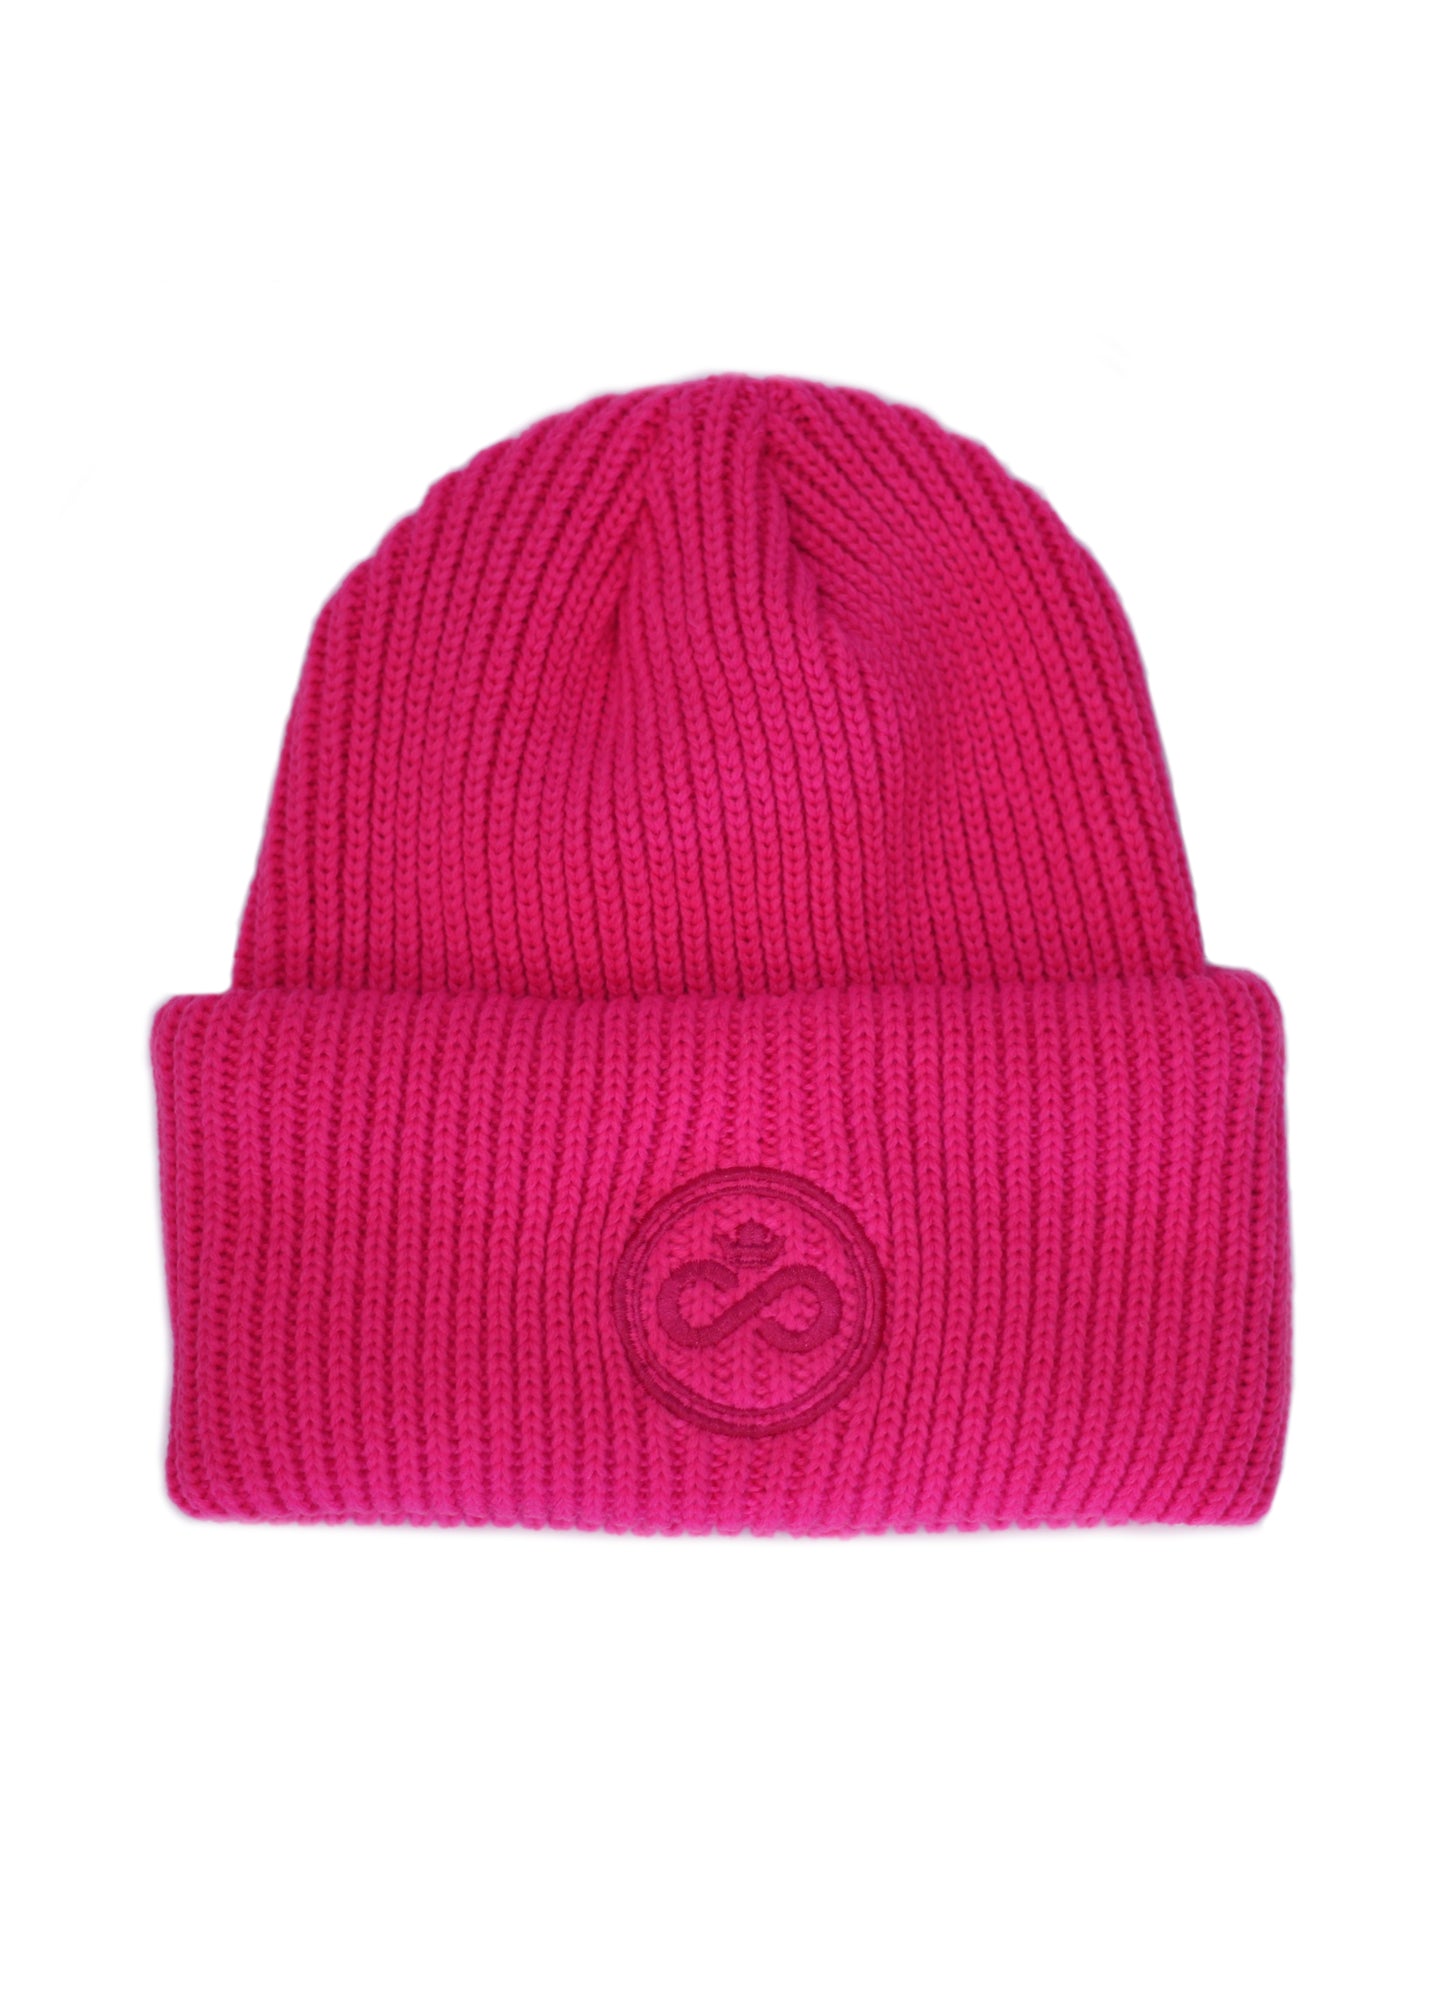 Tuque framboise Nomade - taille adulte